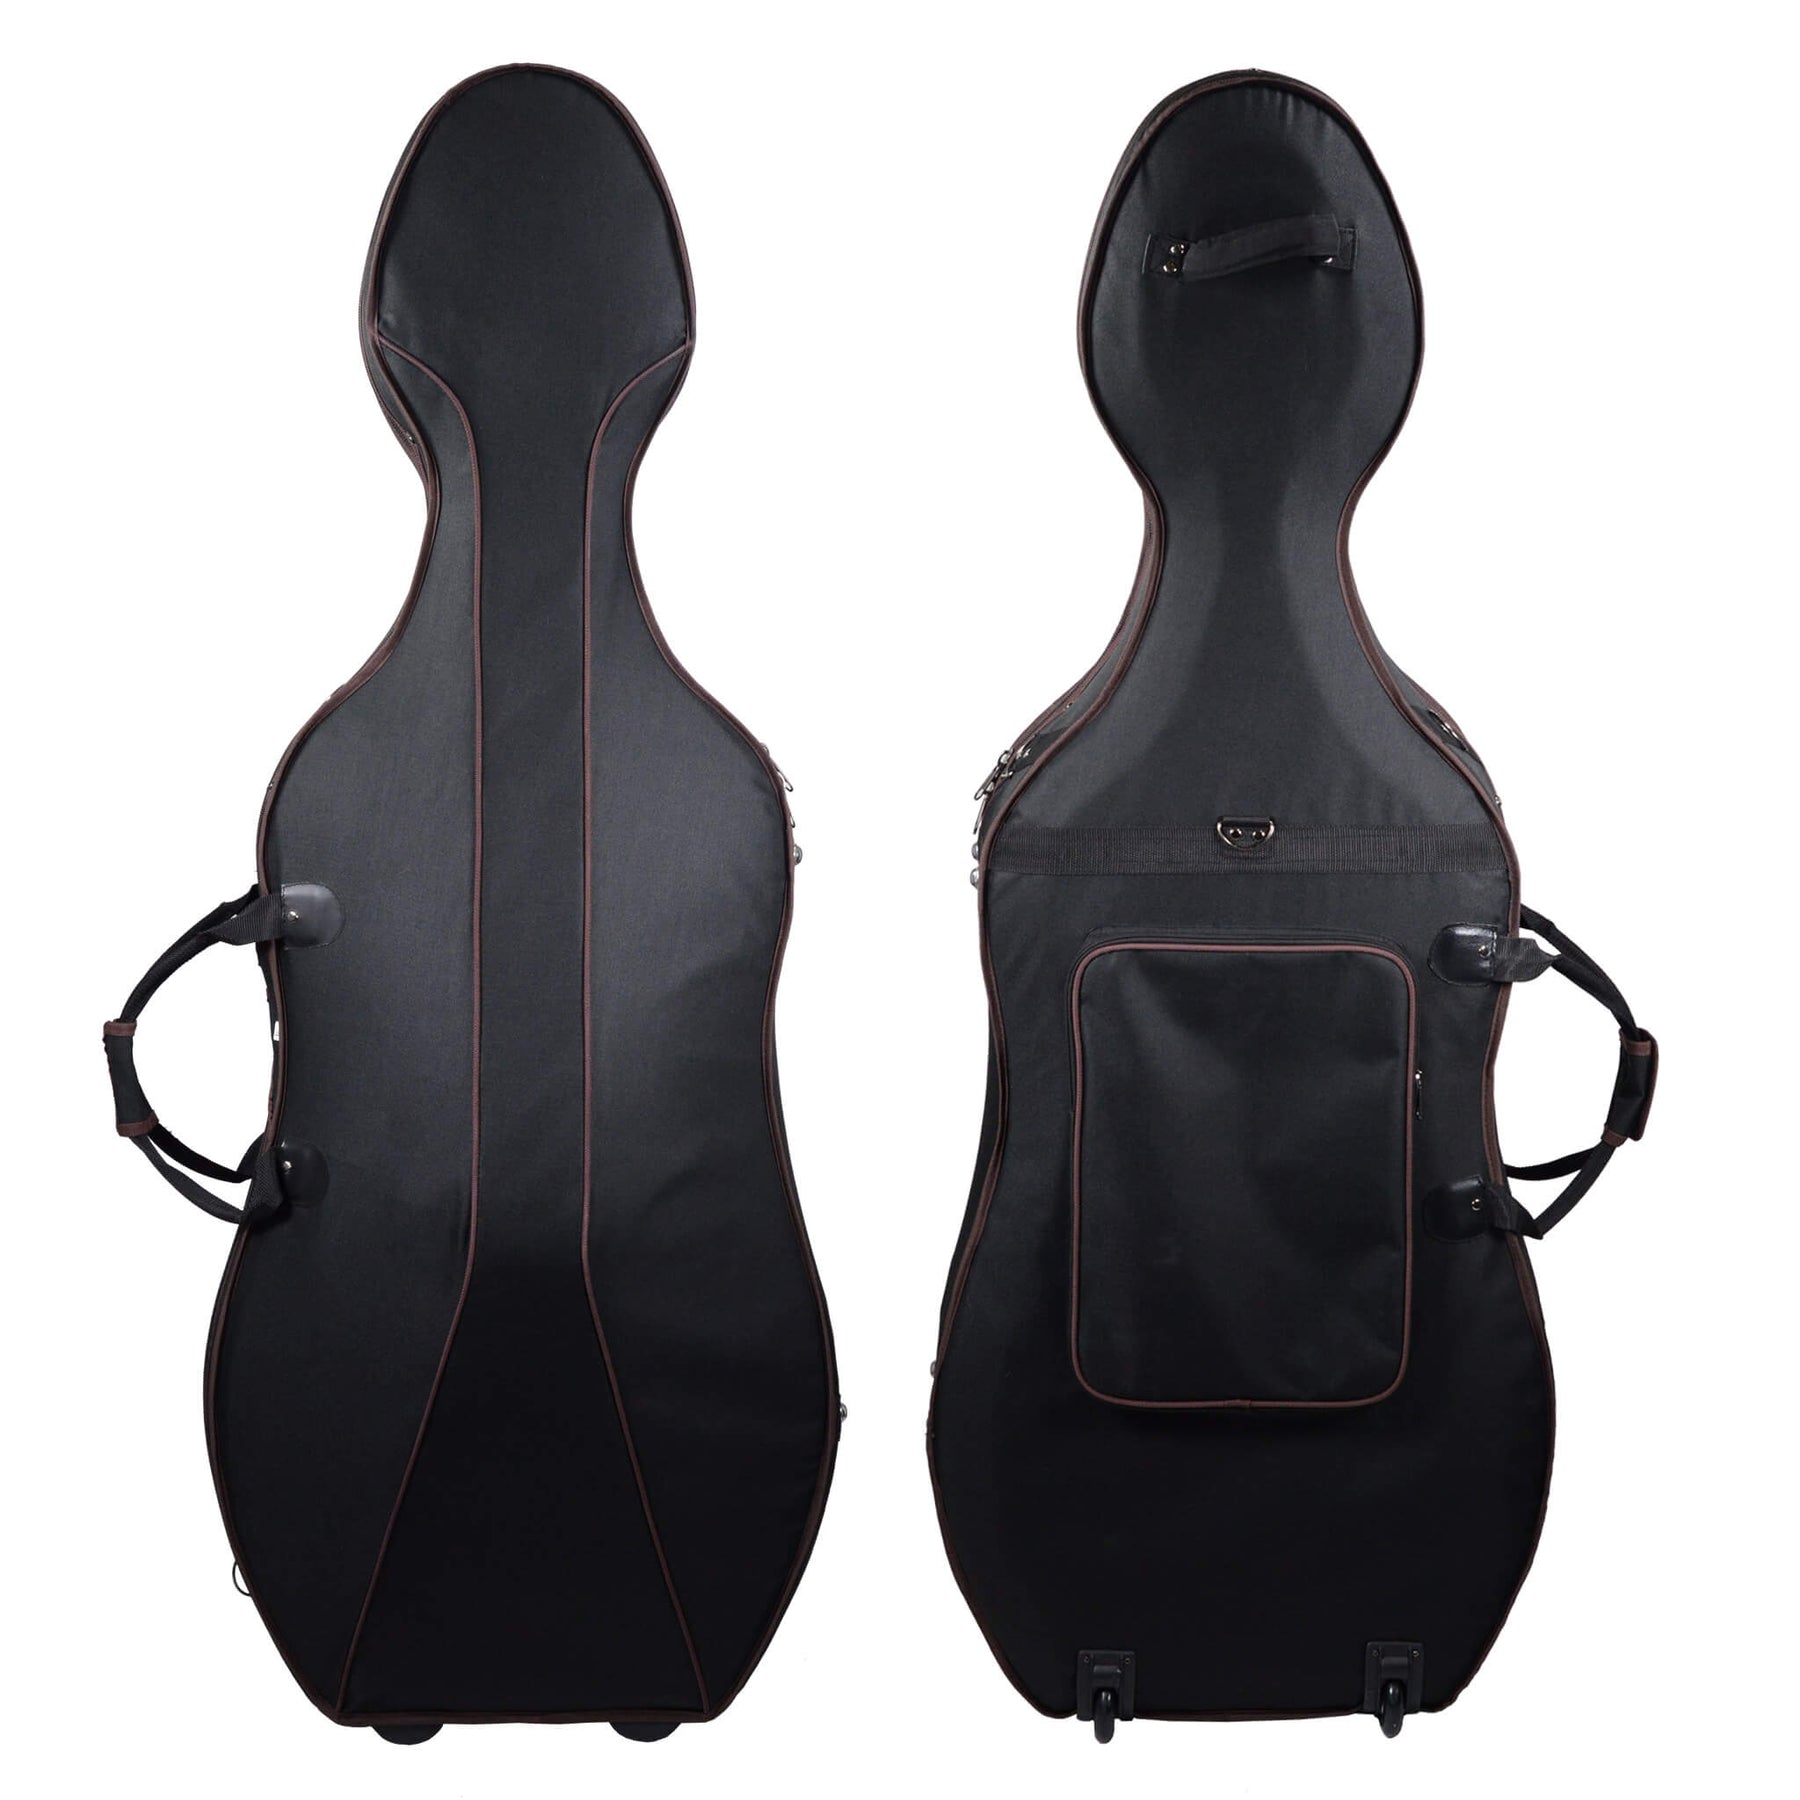 B-Stock Fiddlerman Artist Cello Outfit